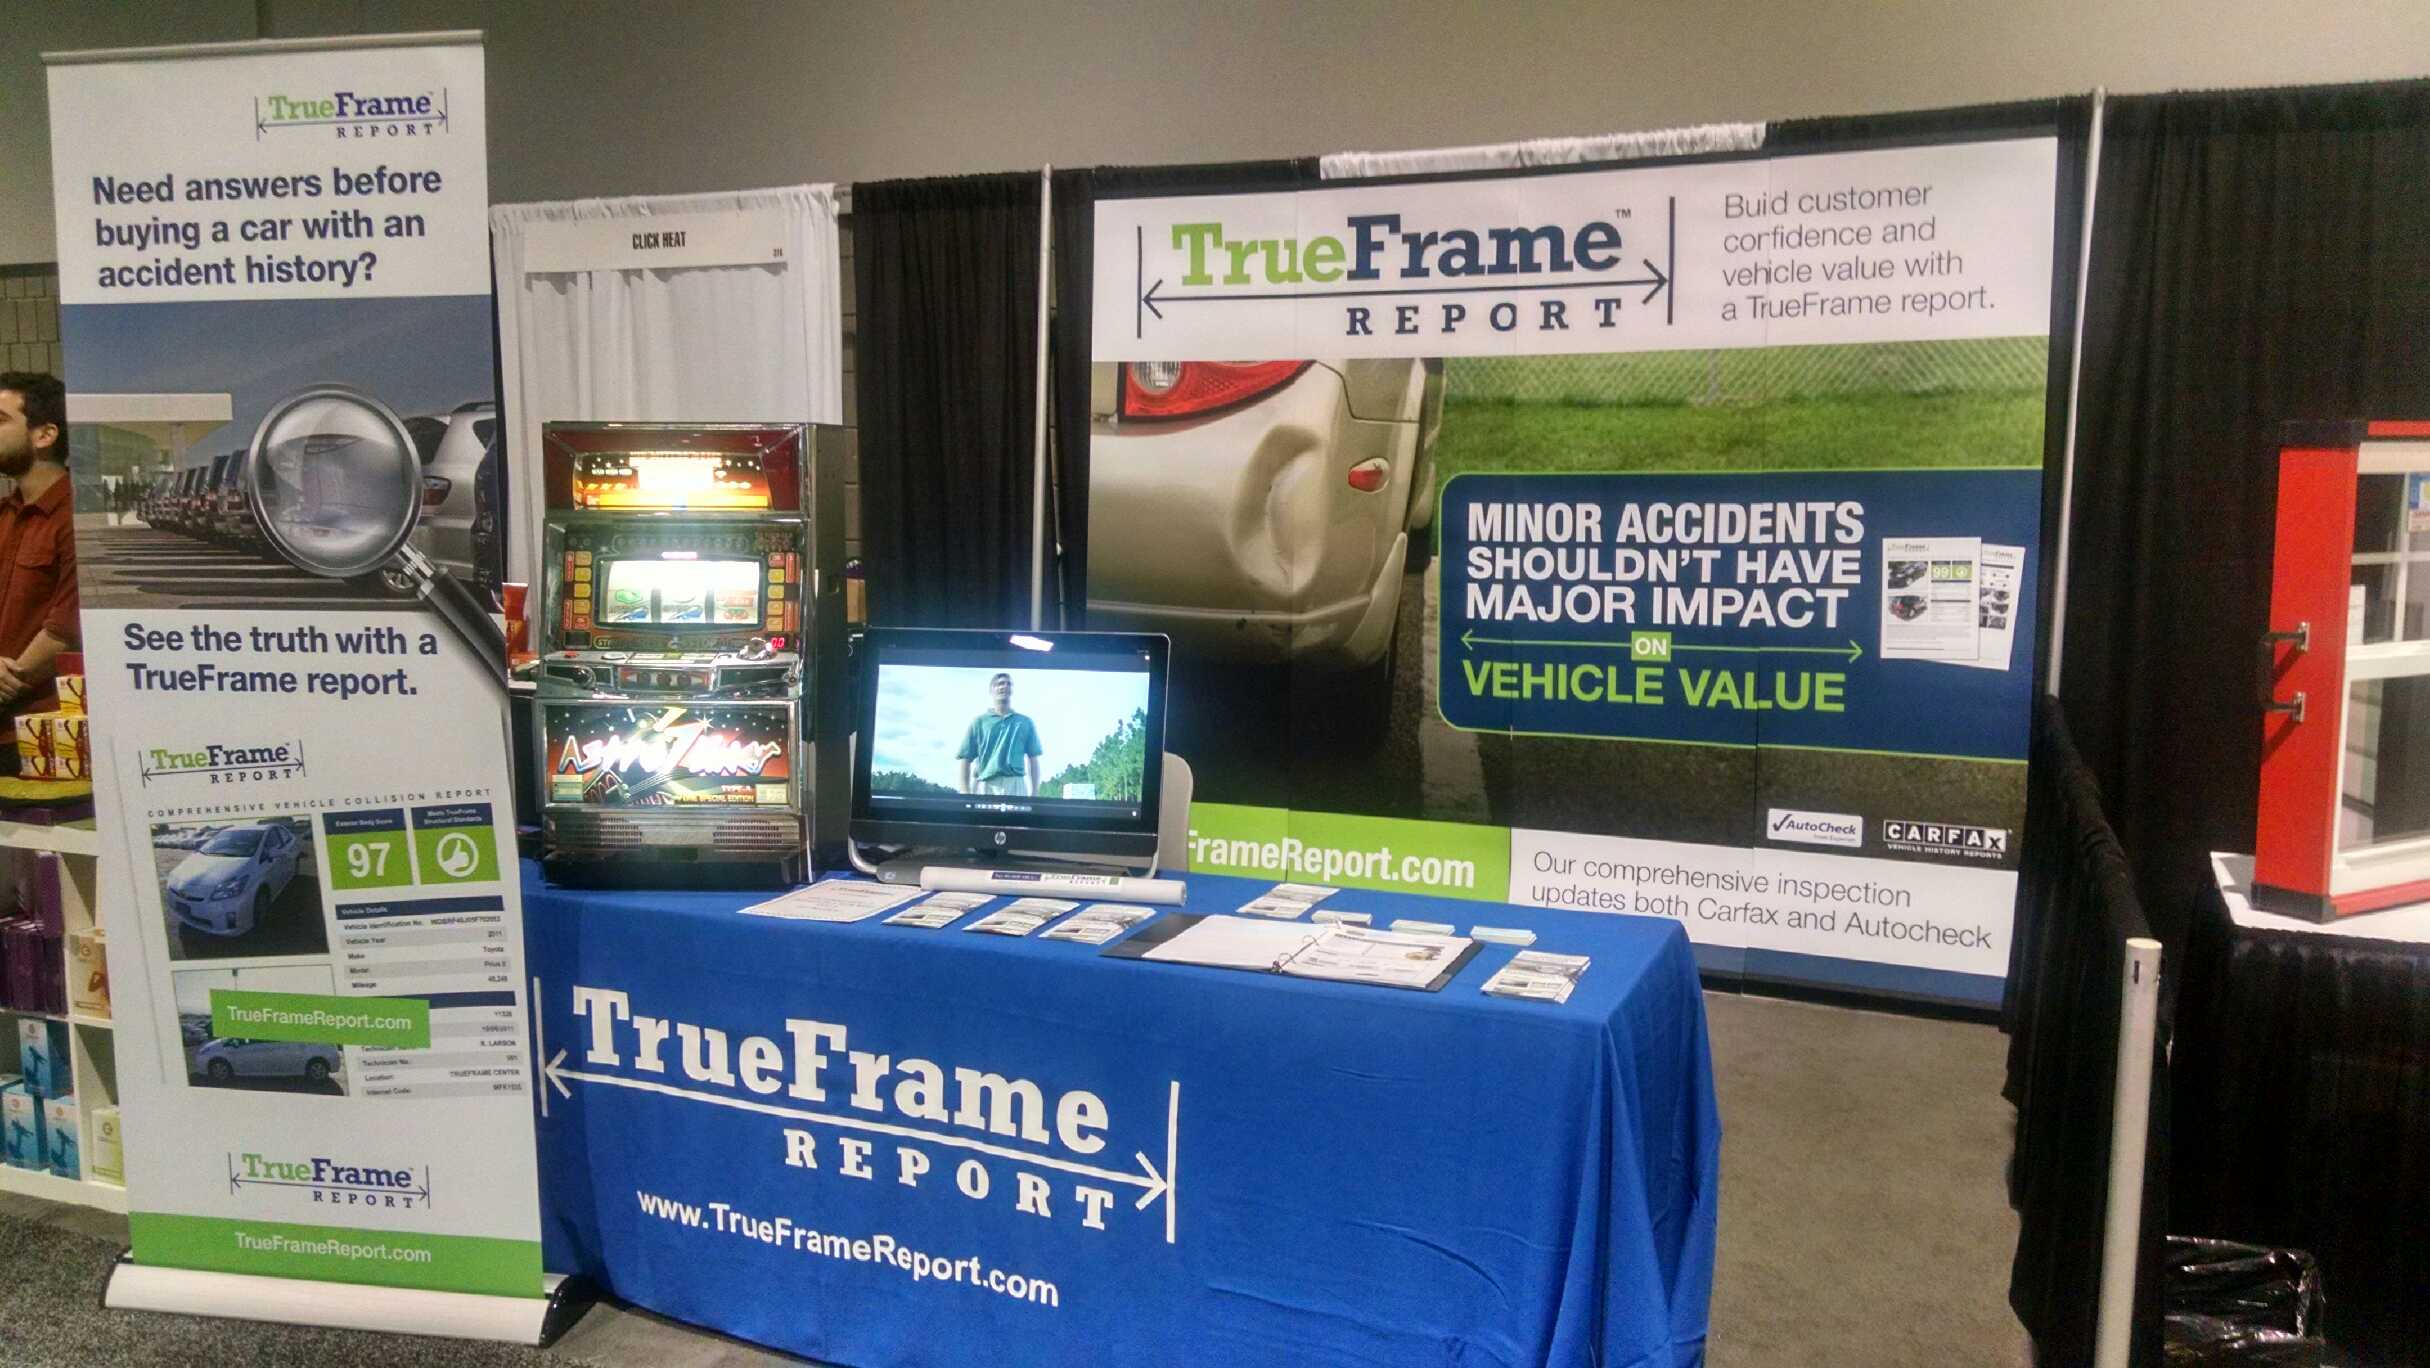 TrueFrame of is Appearing at the Atlanta International Auto Show